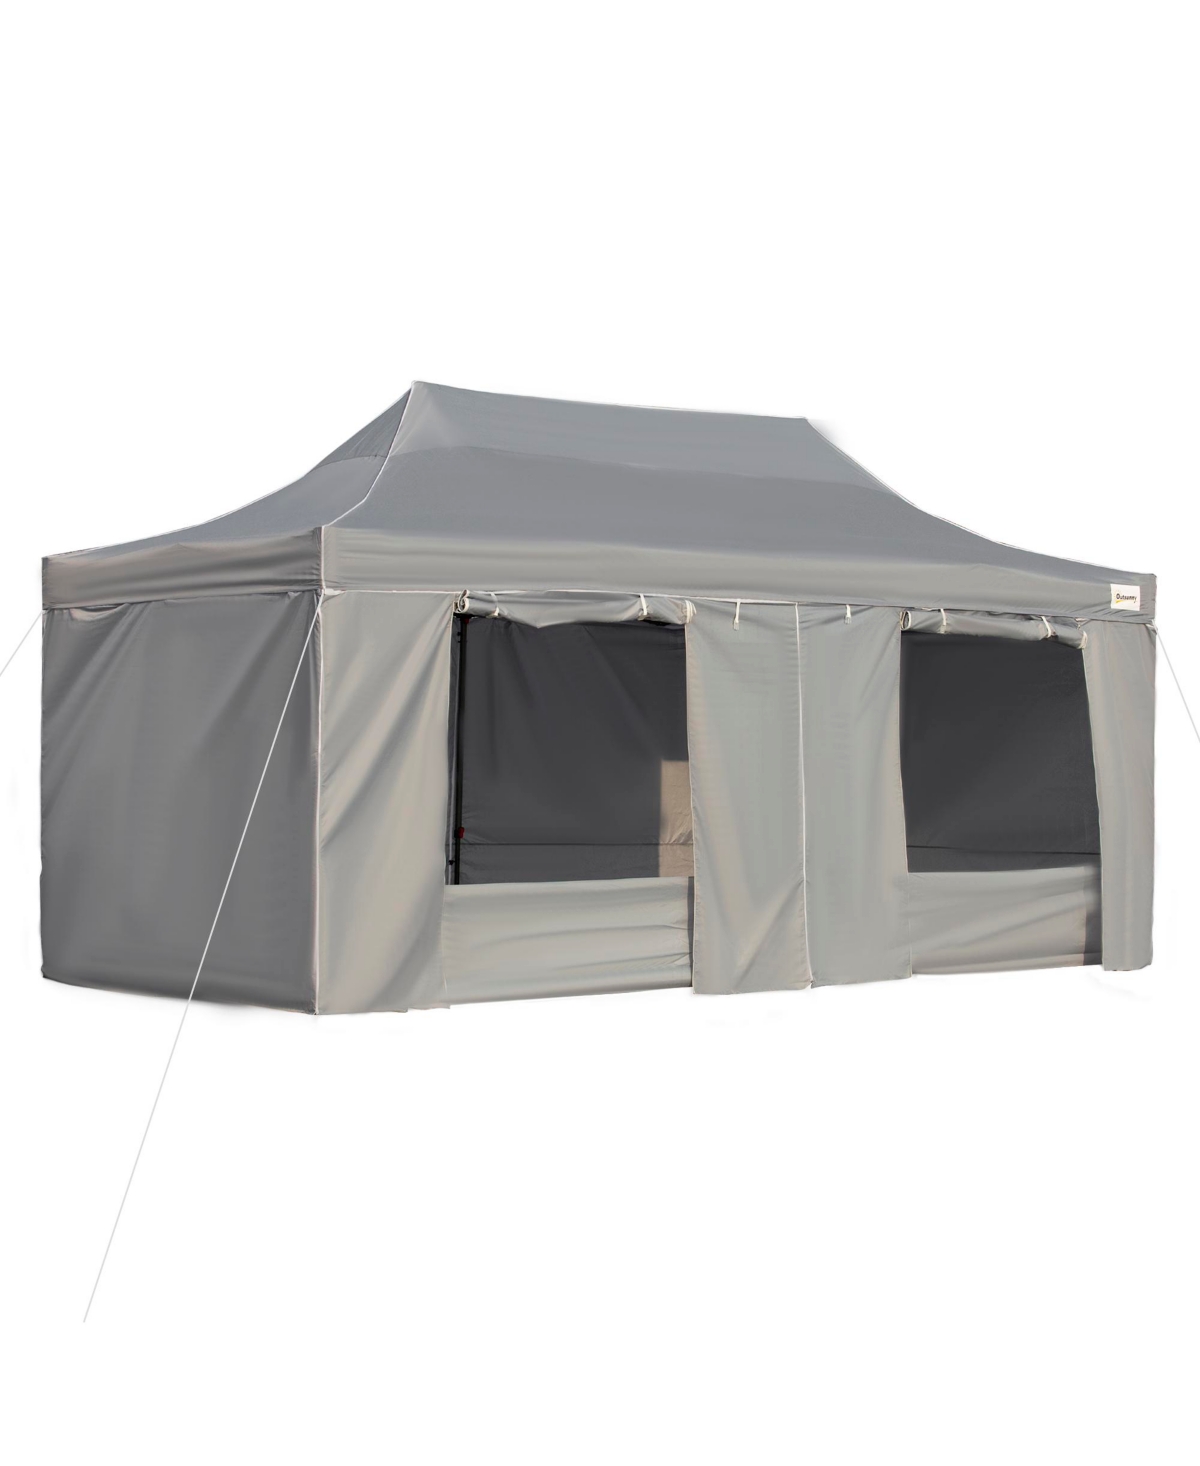 10' x 20' Pop Up Canopy Tent with Sidewalls, Instant Tents for Parties with Wheeled Carry Bag, Height Adjustable, for Outdoor, Garden, Patio,